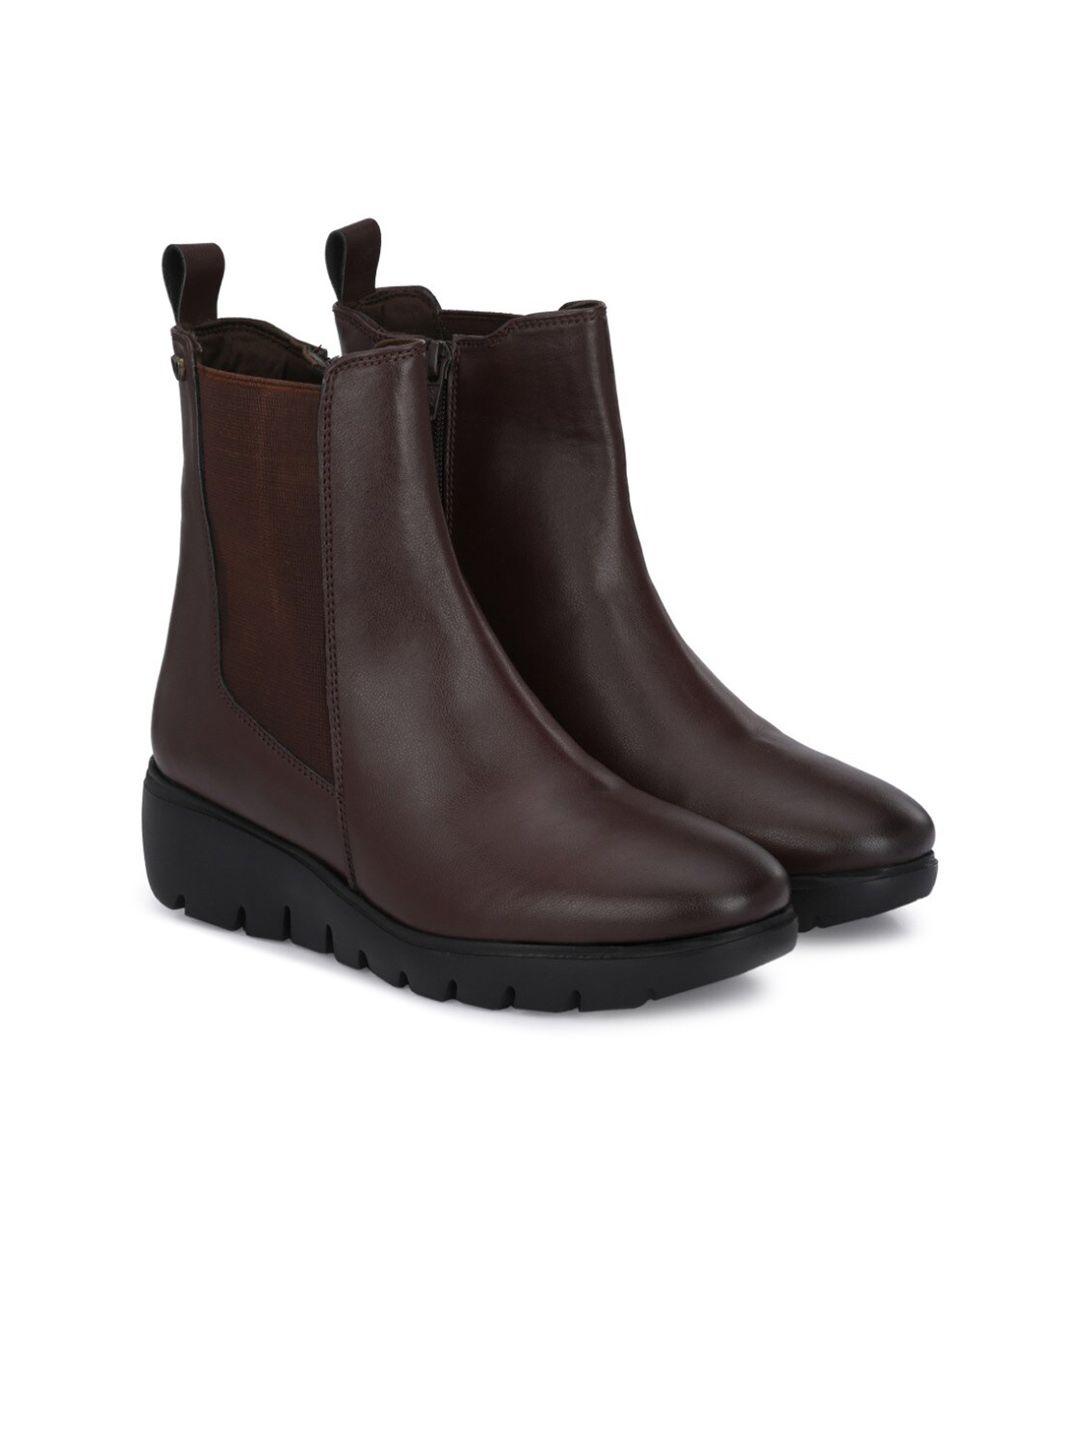 delize-women-round-toe-casual-wedge-chelsea-boots